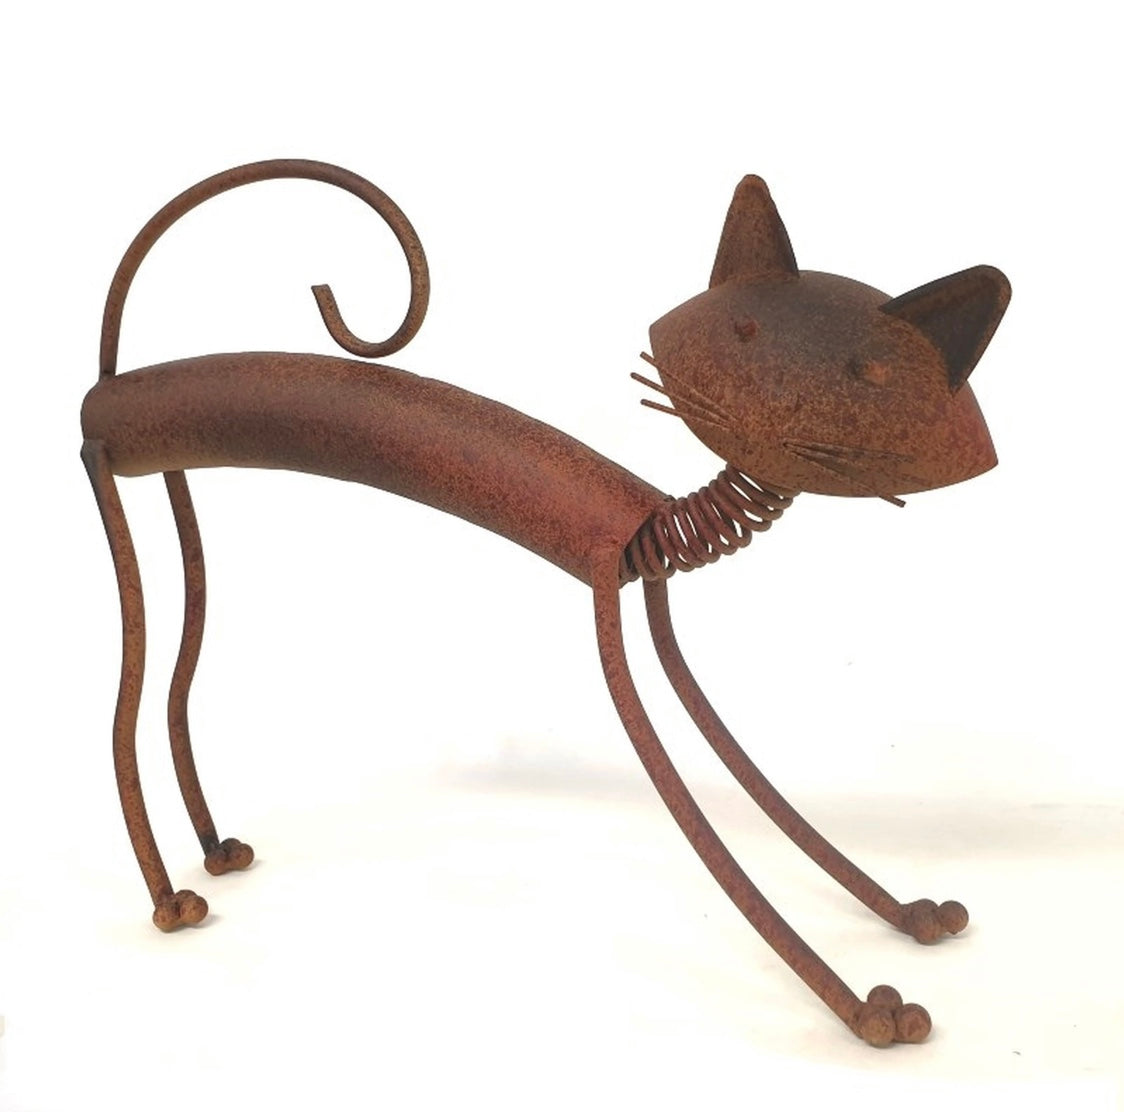 CAT | The perfect gift for the home or garden.